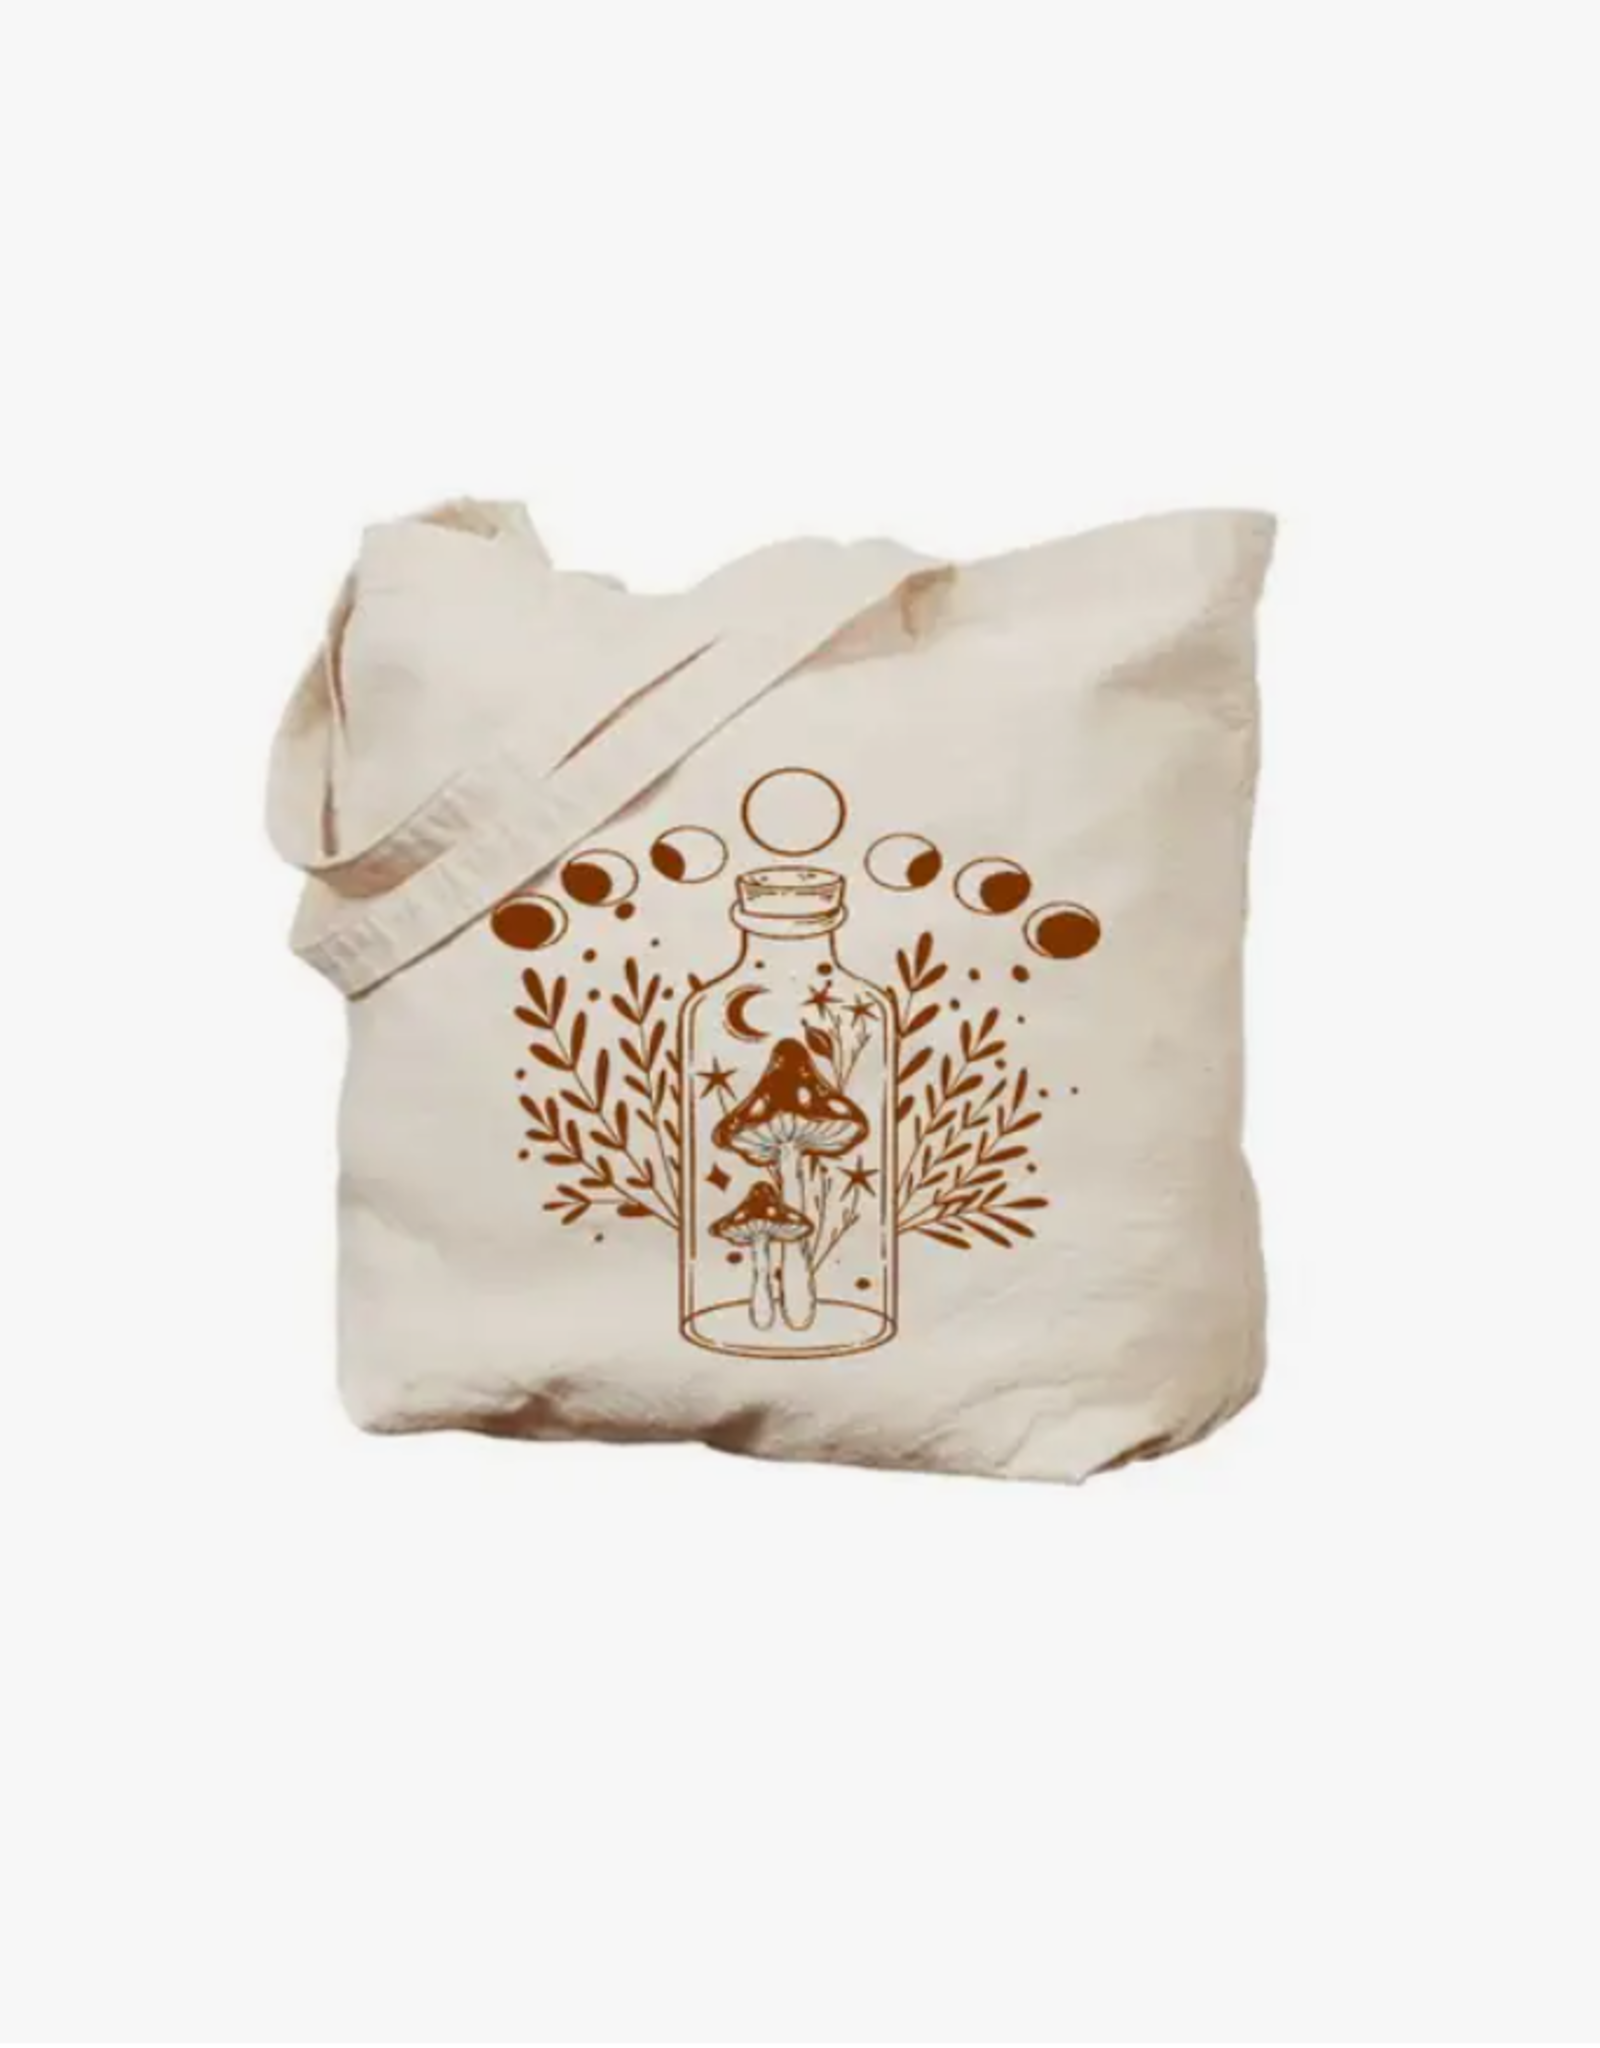 Mushroom Magic Botanical Witchy Moon Phase Tote Bags|Brown